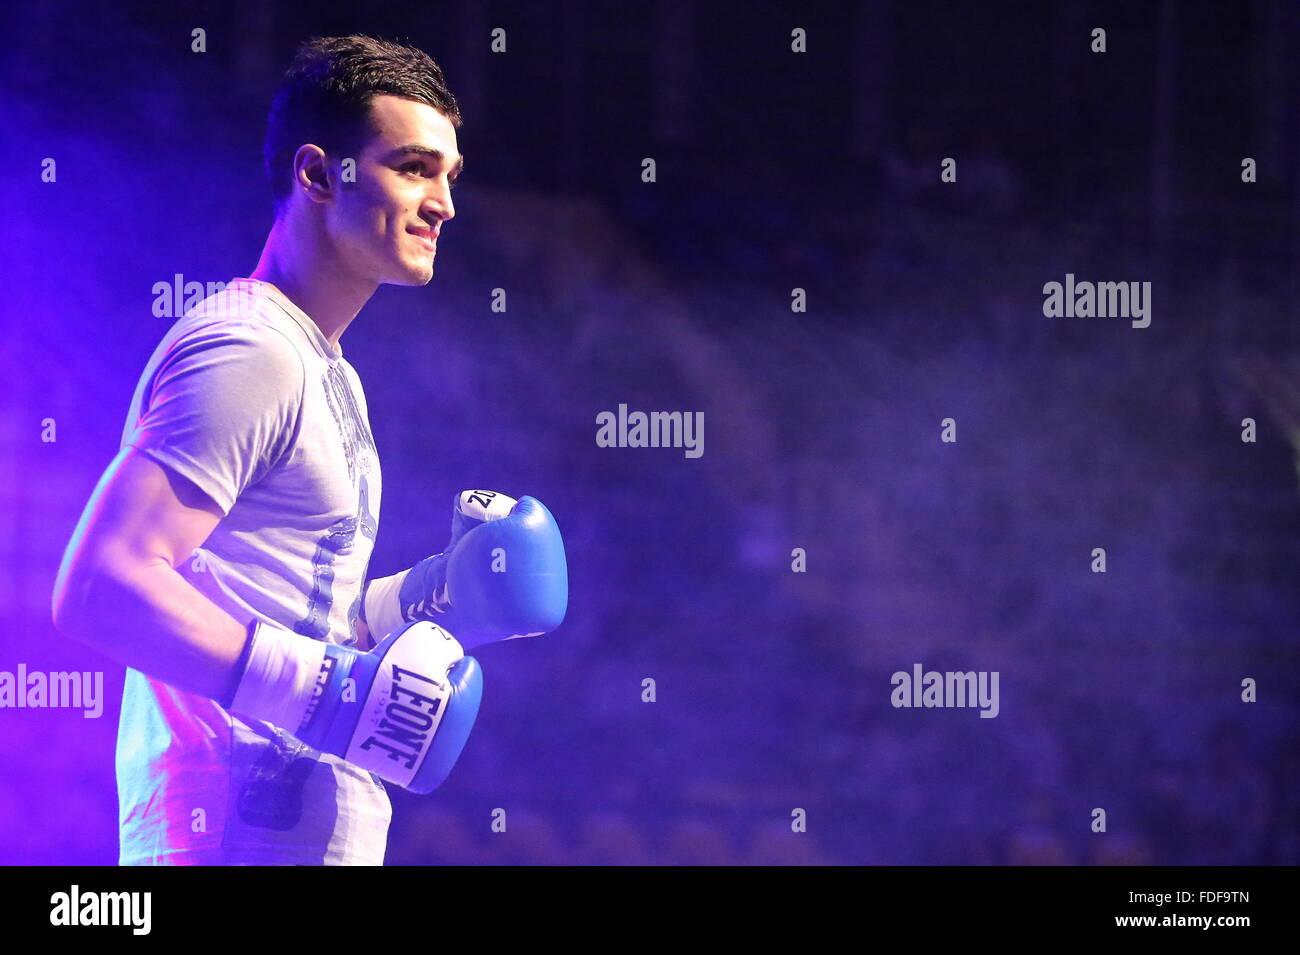 Turin, Italy. 30th January, 2016. The fighter Luca Novello on stage at the  PalaRuffini during the Thai Boxe Mania 2016. Credit: Massimiliano  Ferraro/Pacific Press/Alamy Live News Stock Photo - Alamy